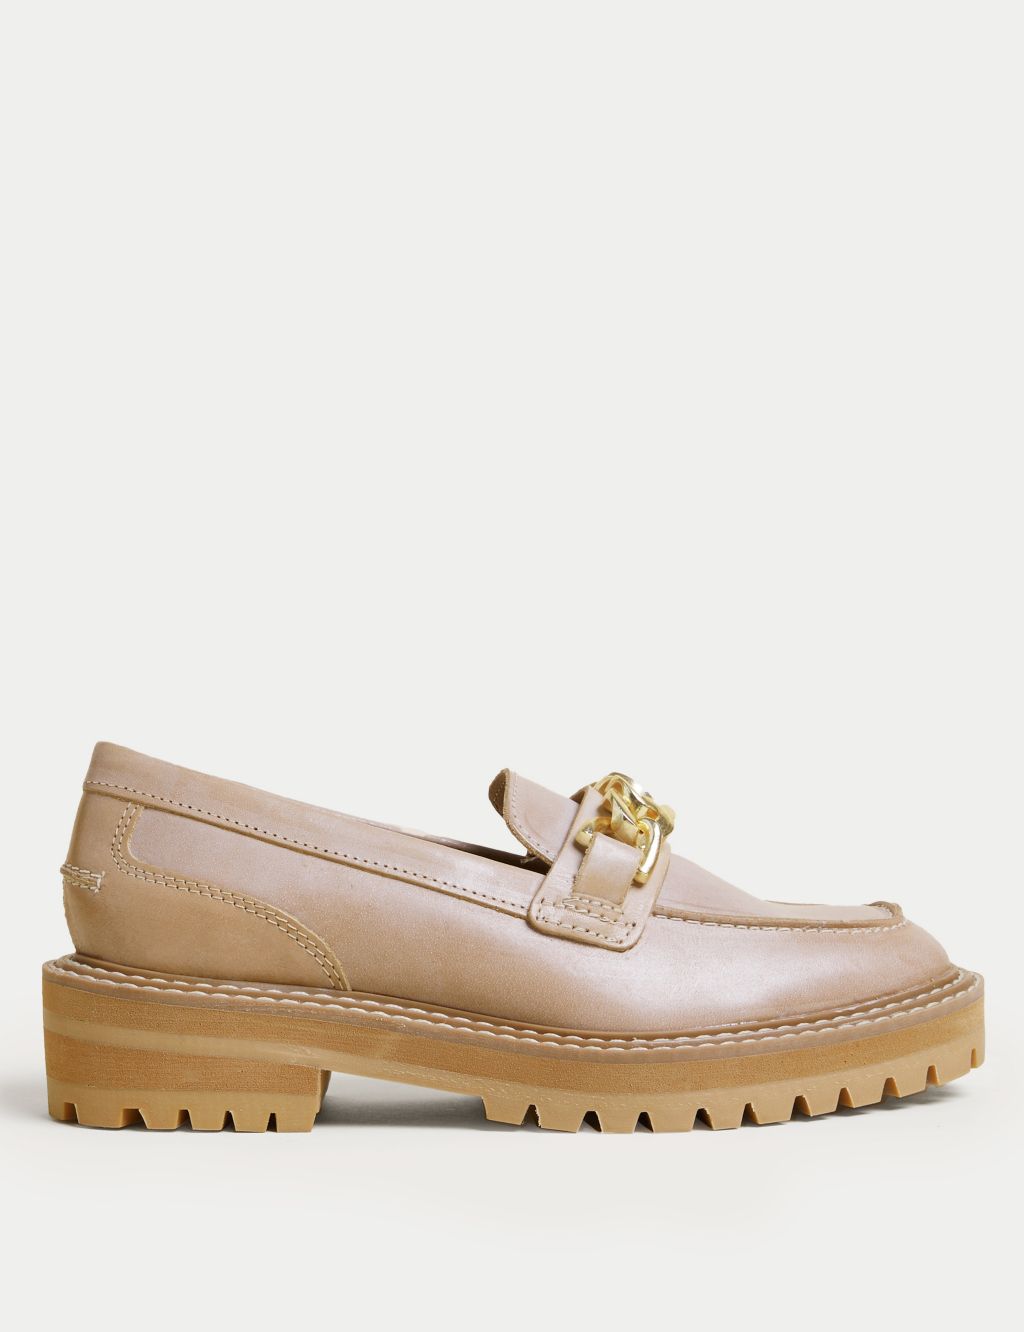 Leather Chain Detail Block Heel Loafers image 1